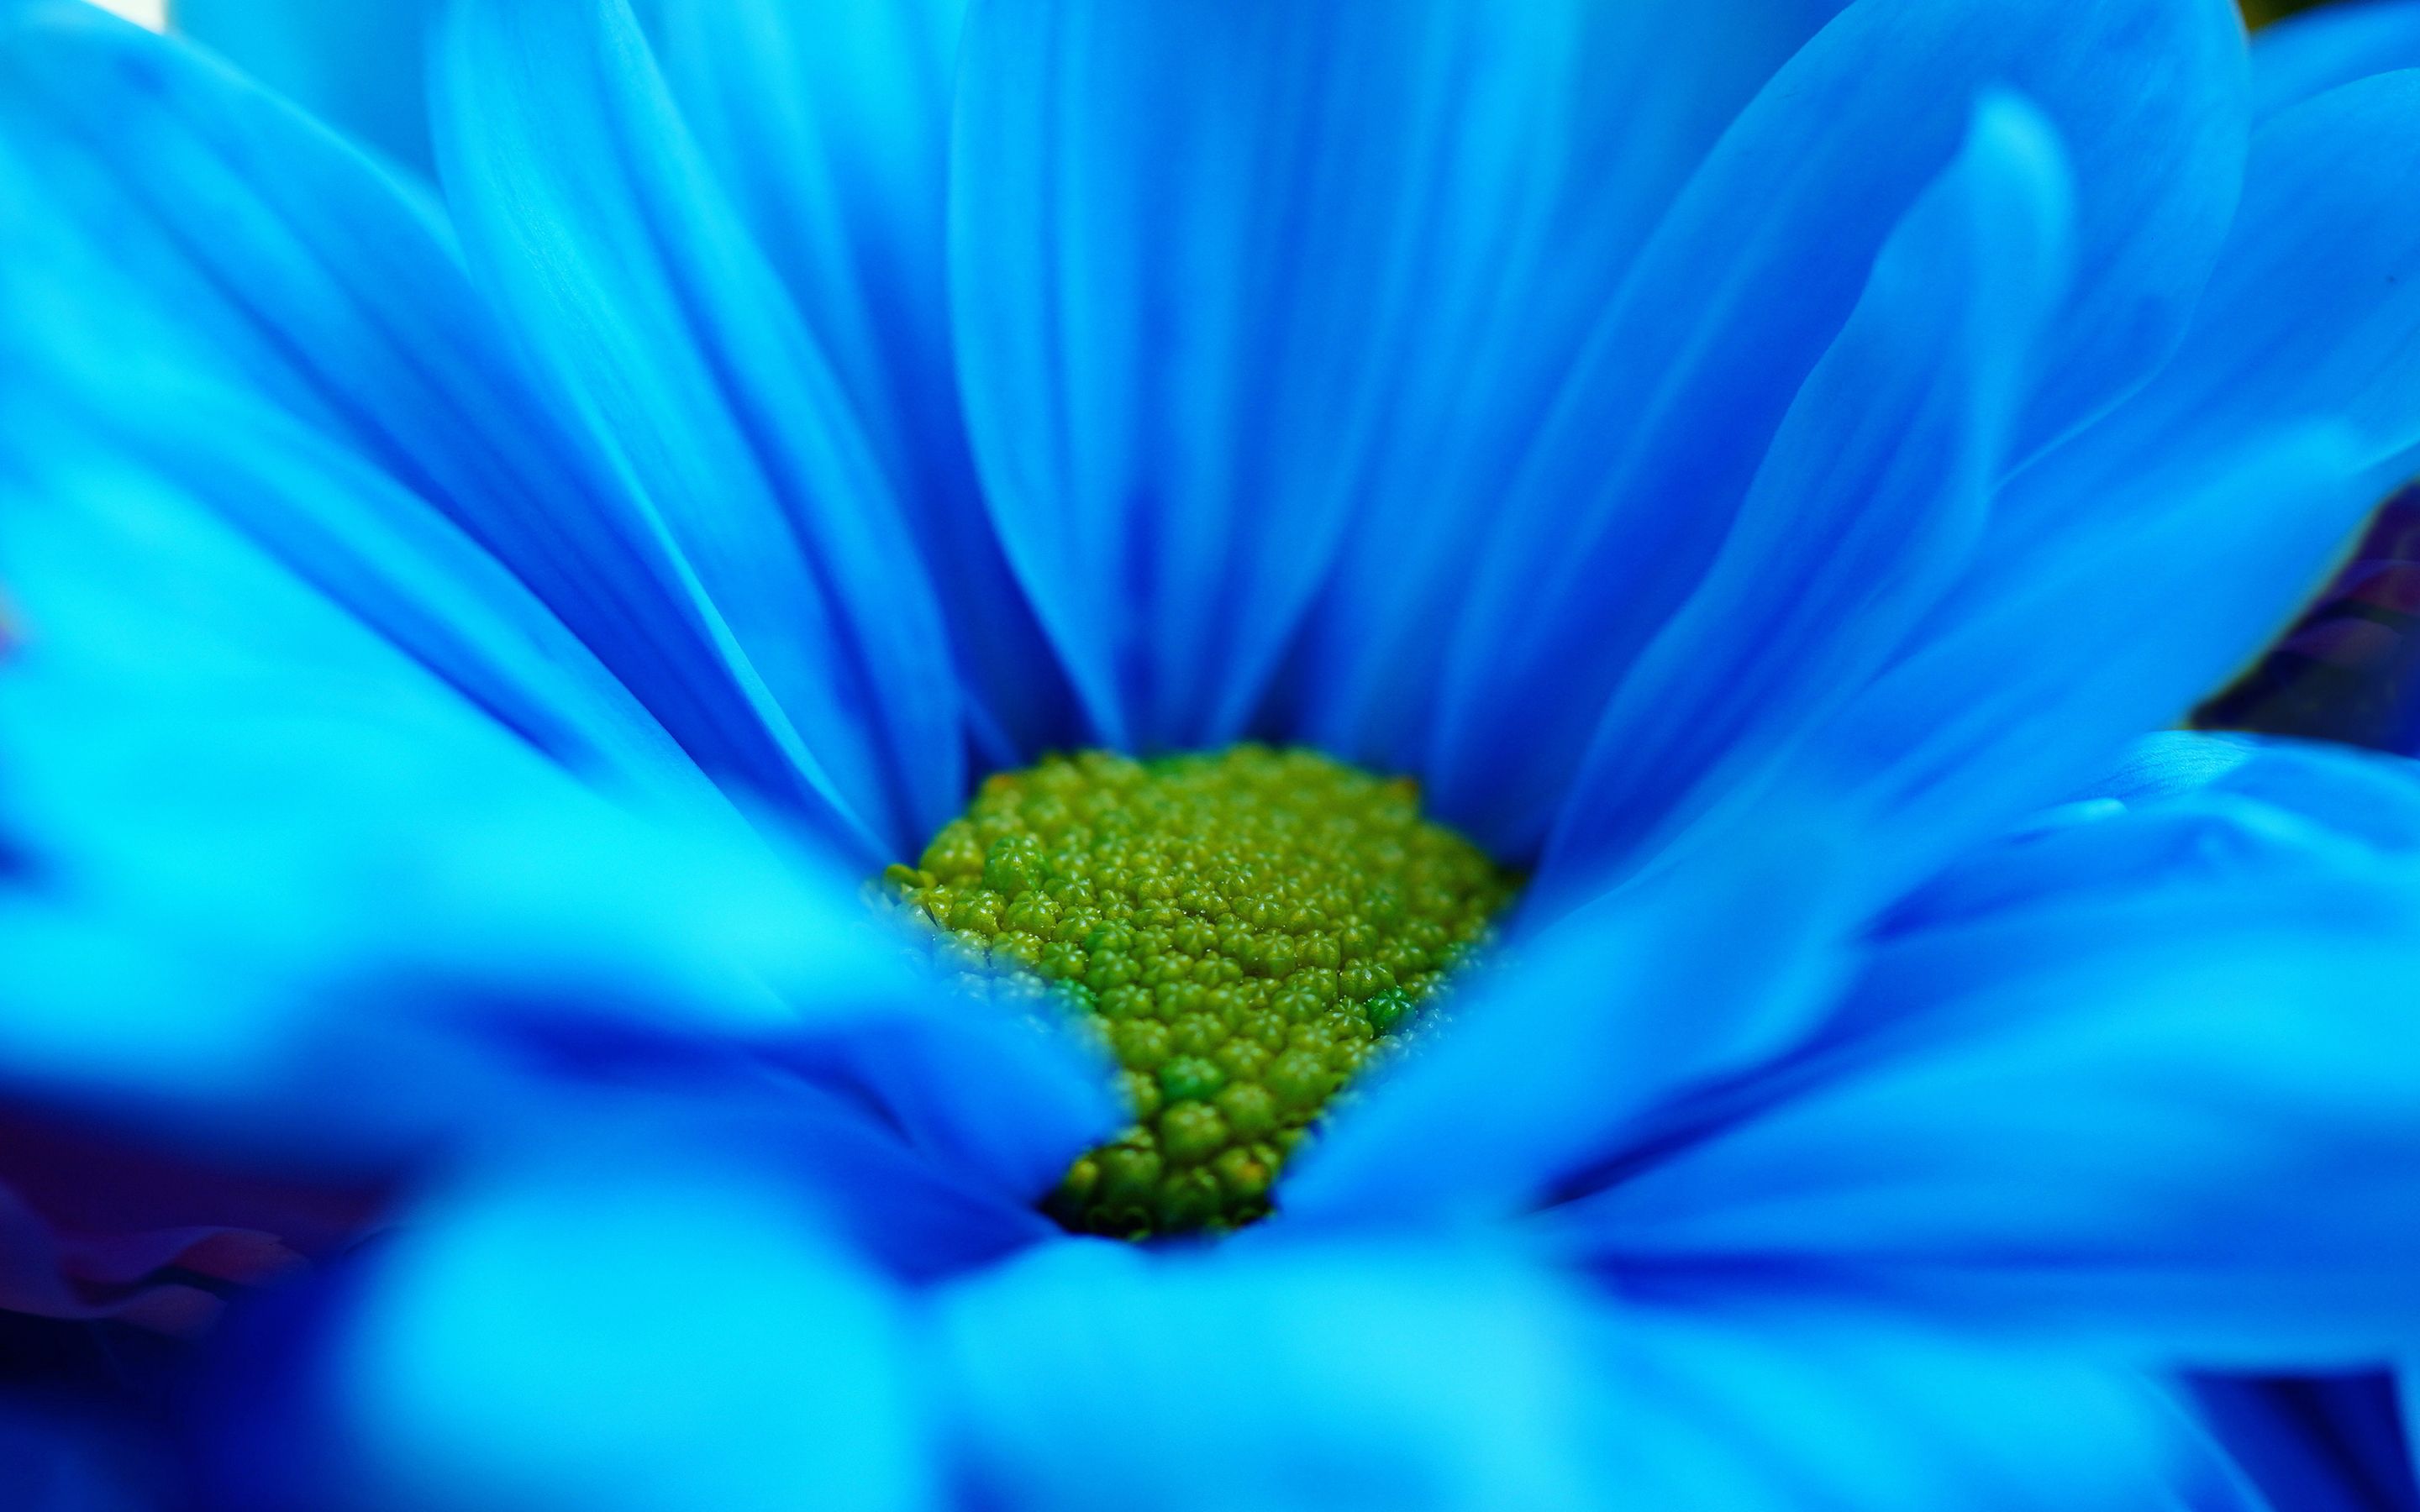 MACRO wallpaper | Blue daisy macro Wallpapers Pictures Photos Images ...